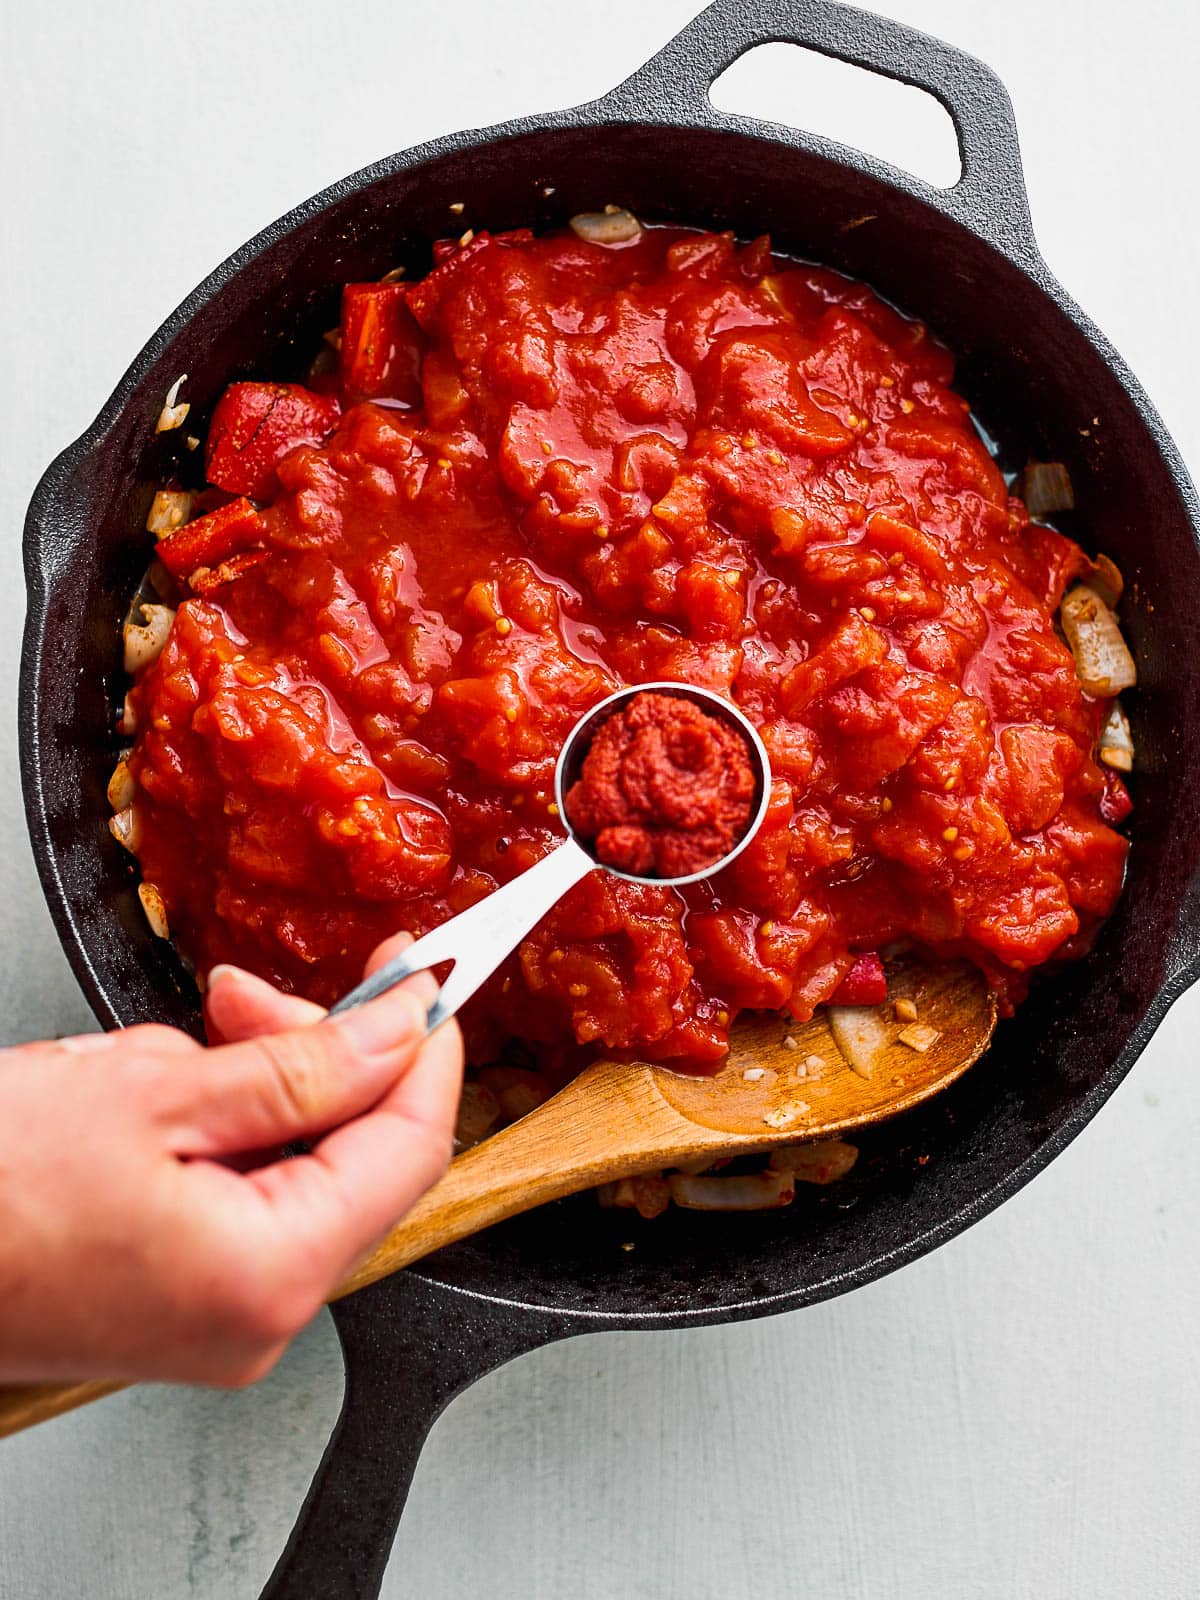 Tomato paste being added to the shakshuka sauce